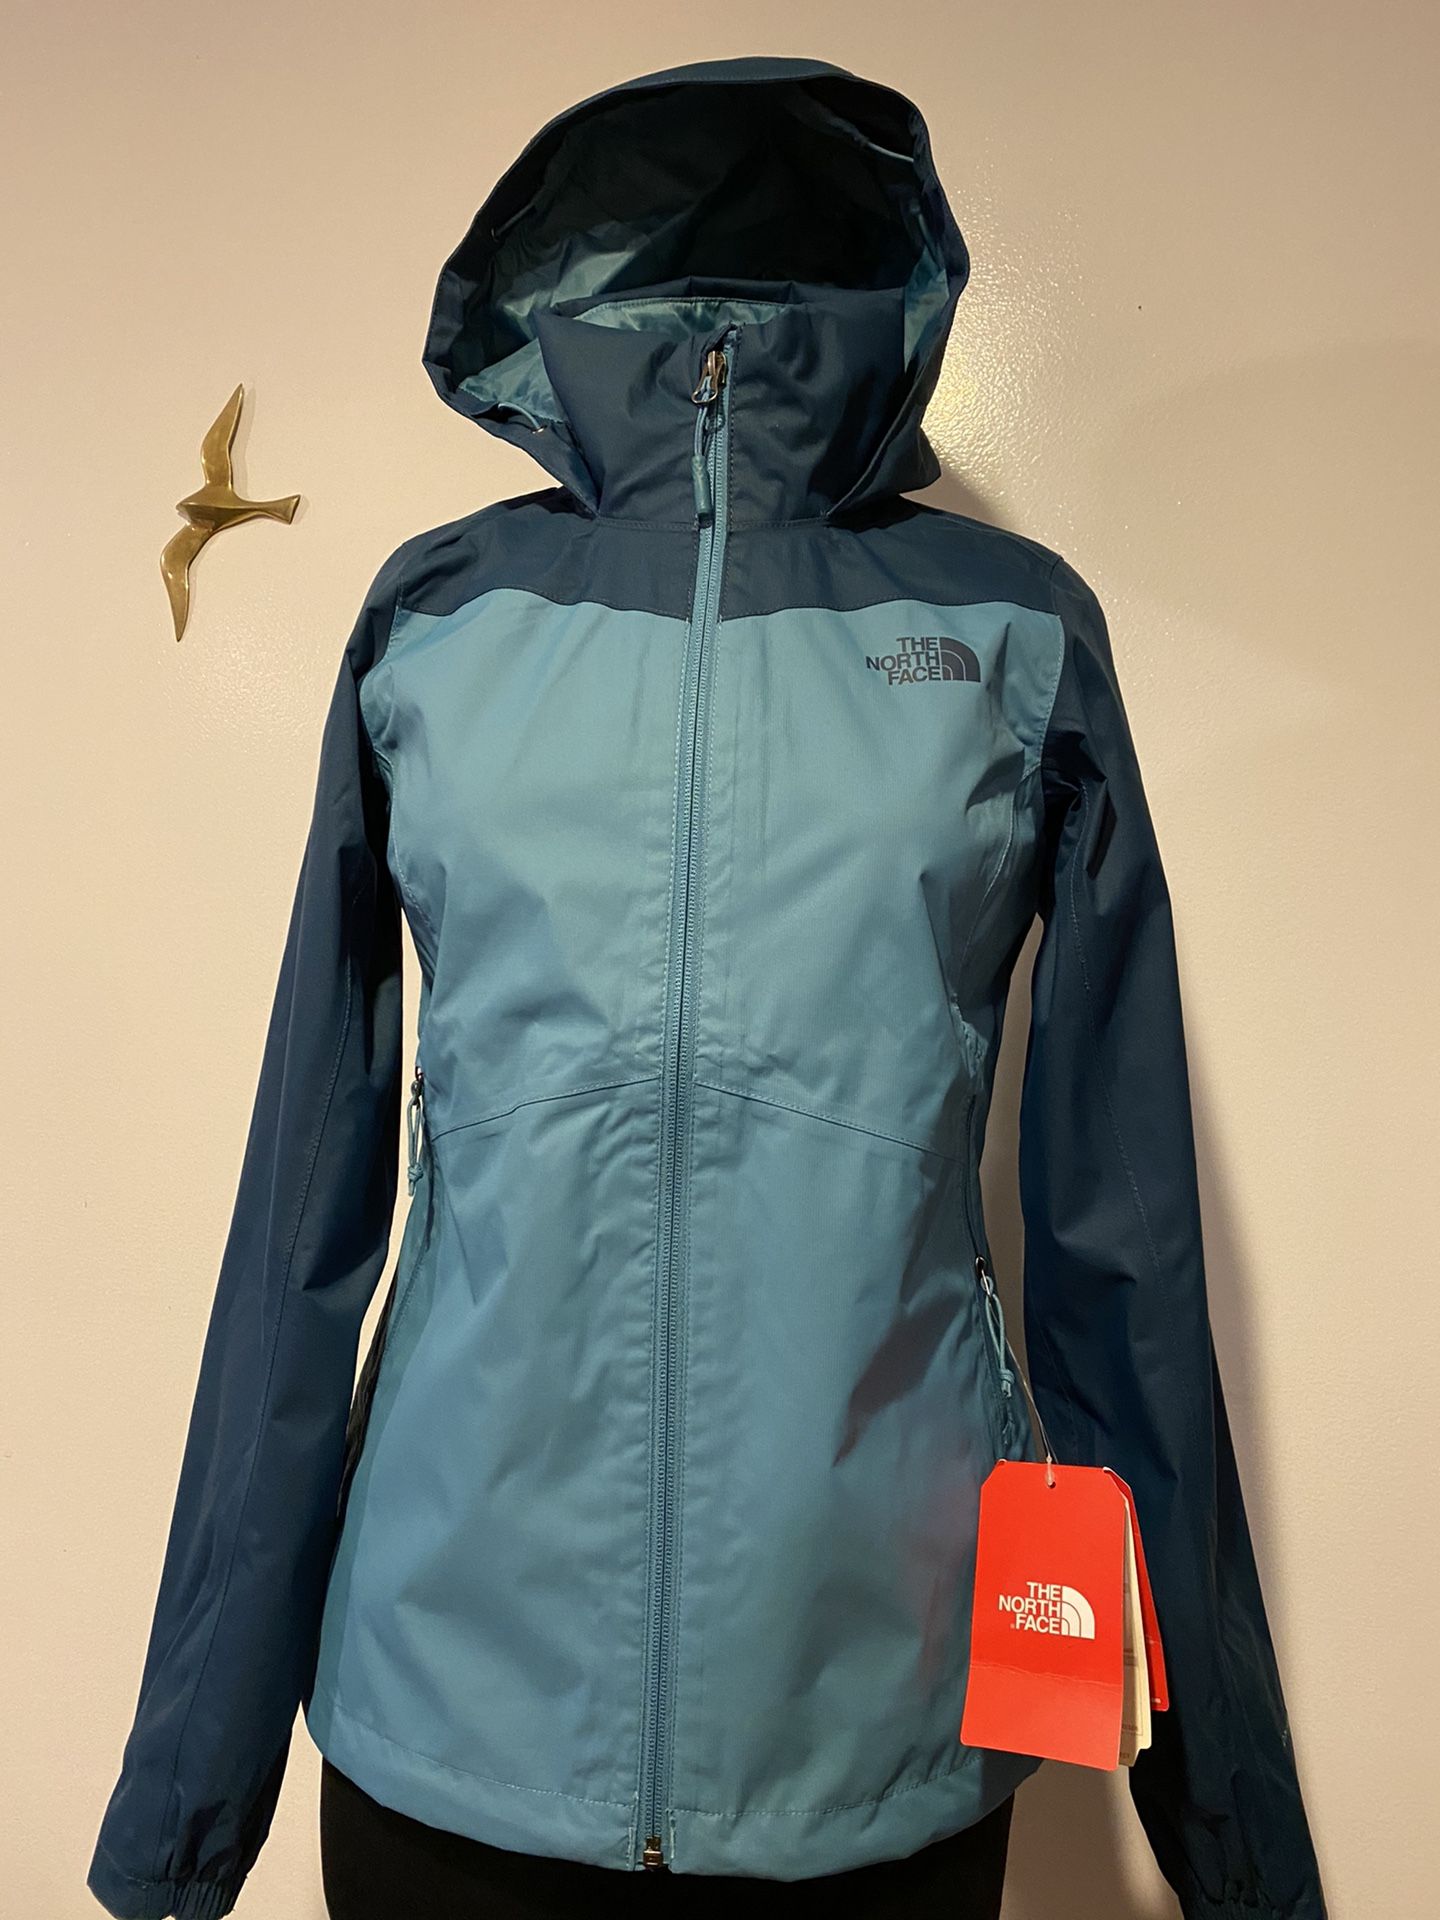 The North Face Dryvent women’s light hooded rain jacket , size XS